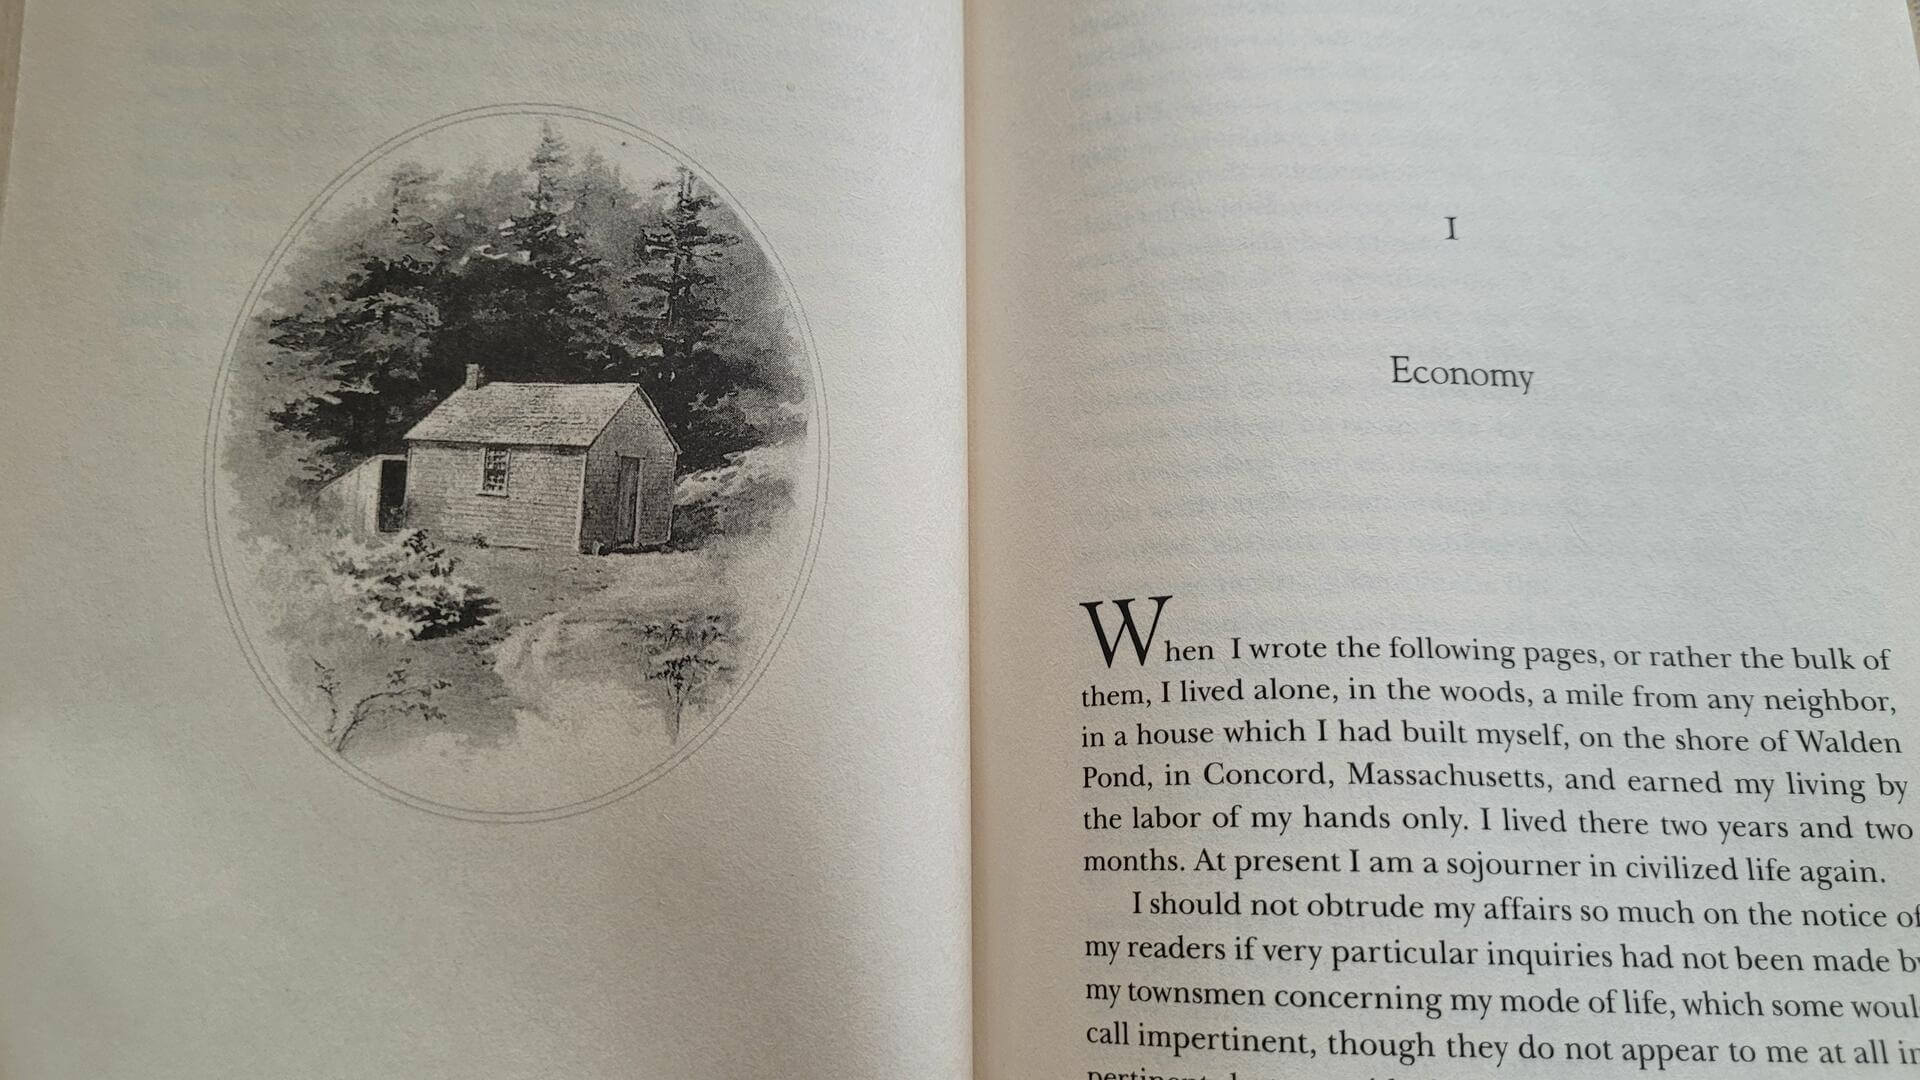 This Bicentennial Edition of Walden includes 30 reproductions of the engravings, daguerreotypes, and period photographs in 1897 1st illustrated volume